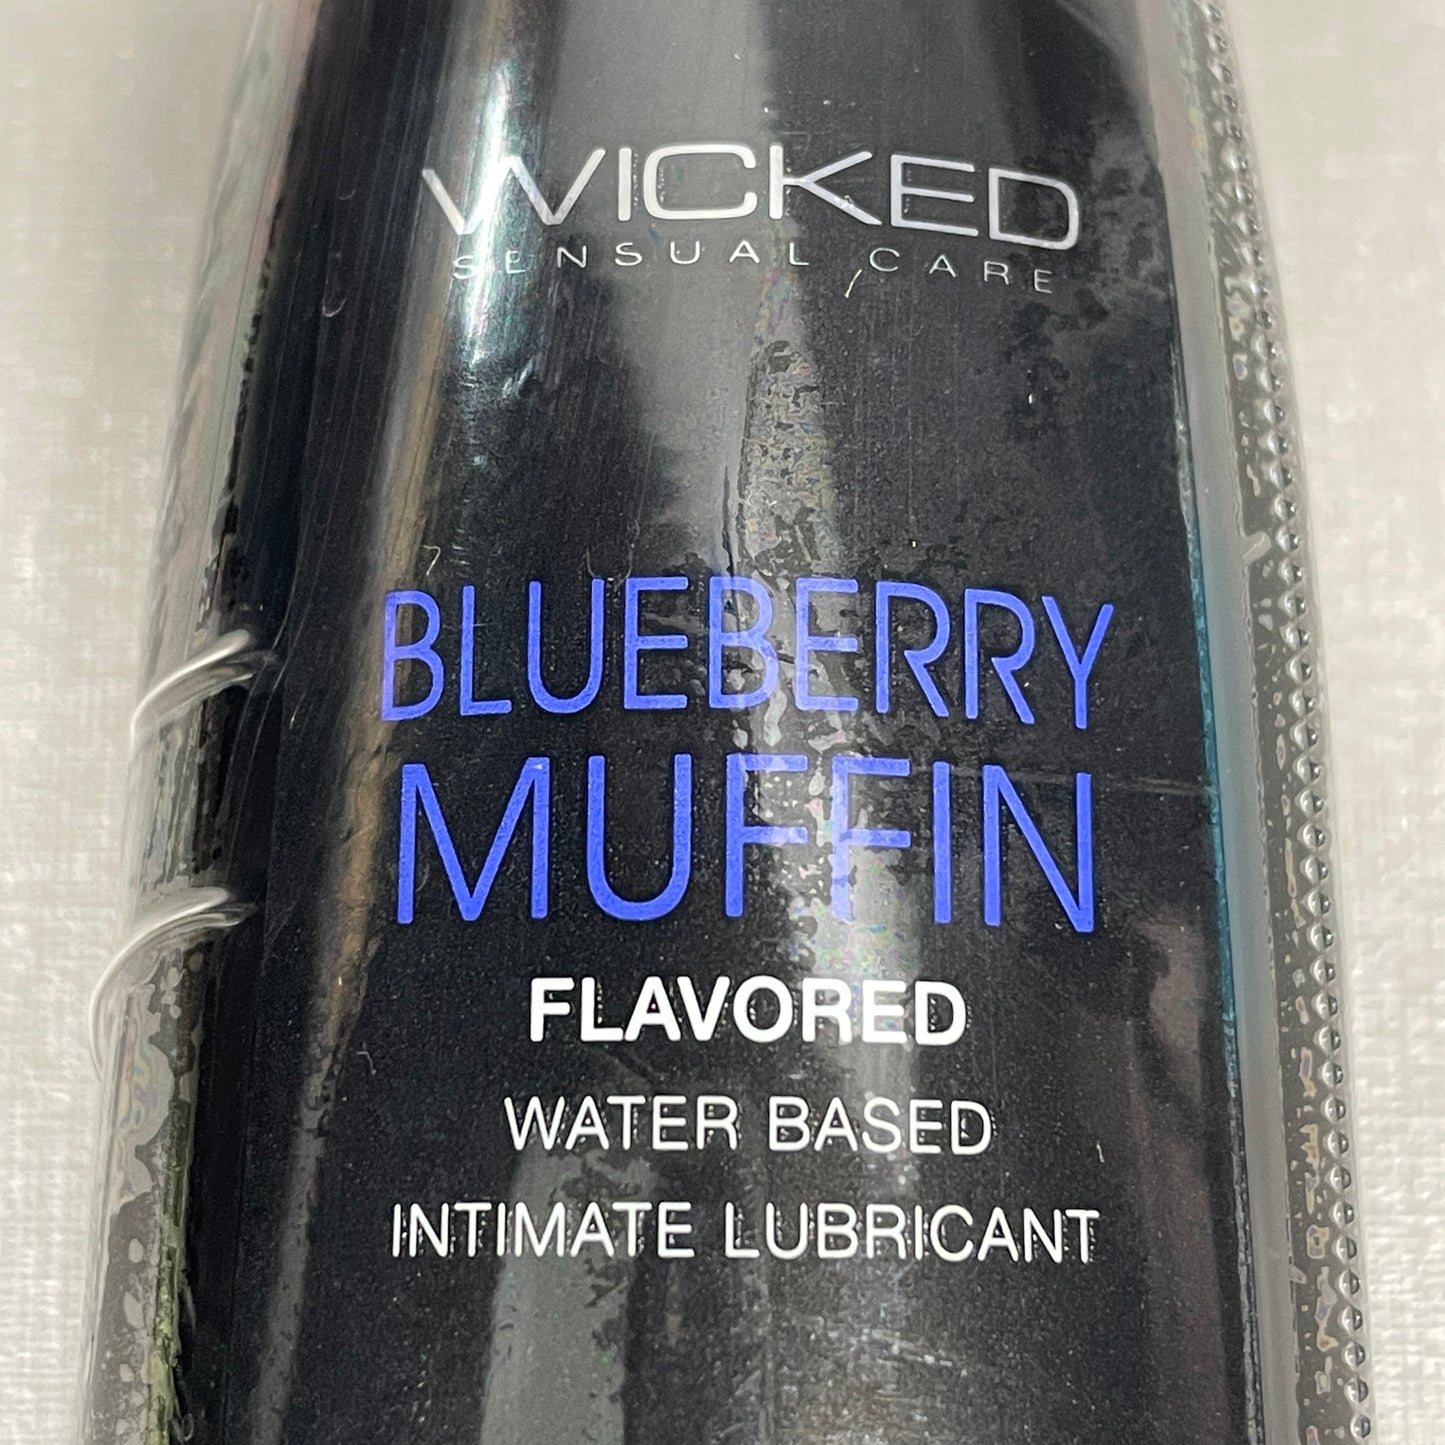 WICKED SENSUAL CARE Blueberry Muffin Flavored Water Based Intimate Lubricant 2 oz Exp 11/23 (New)